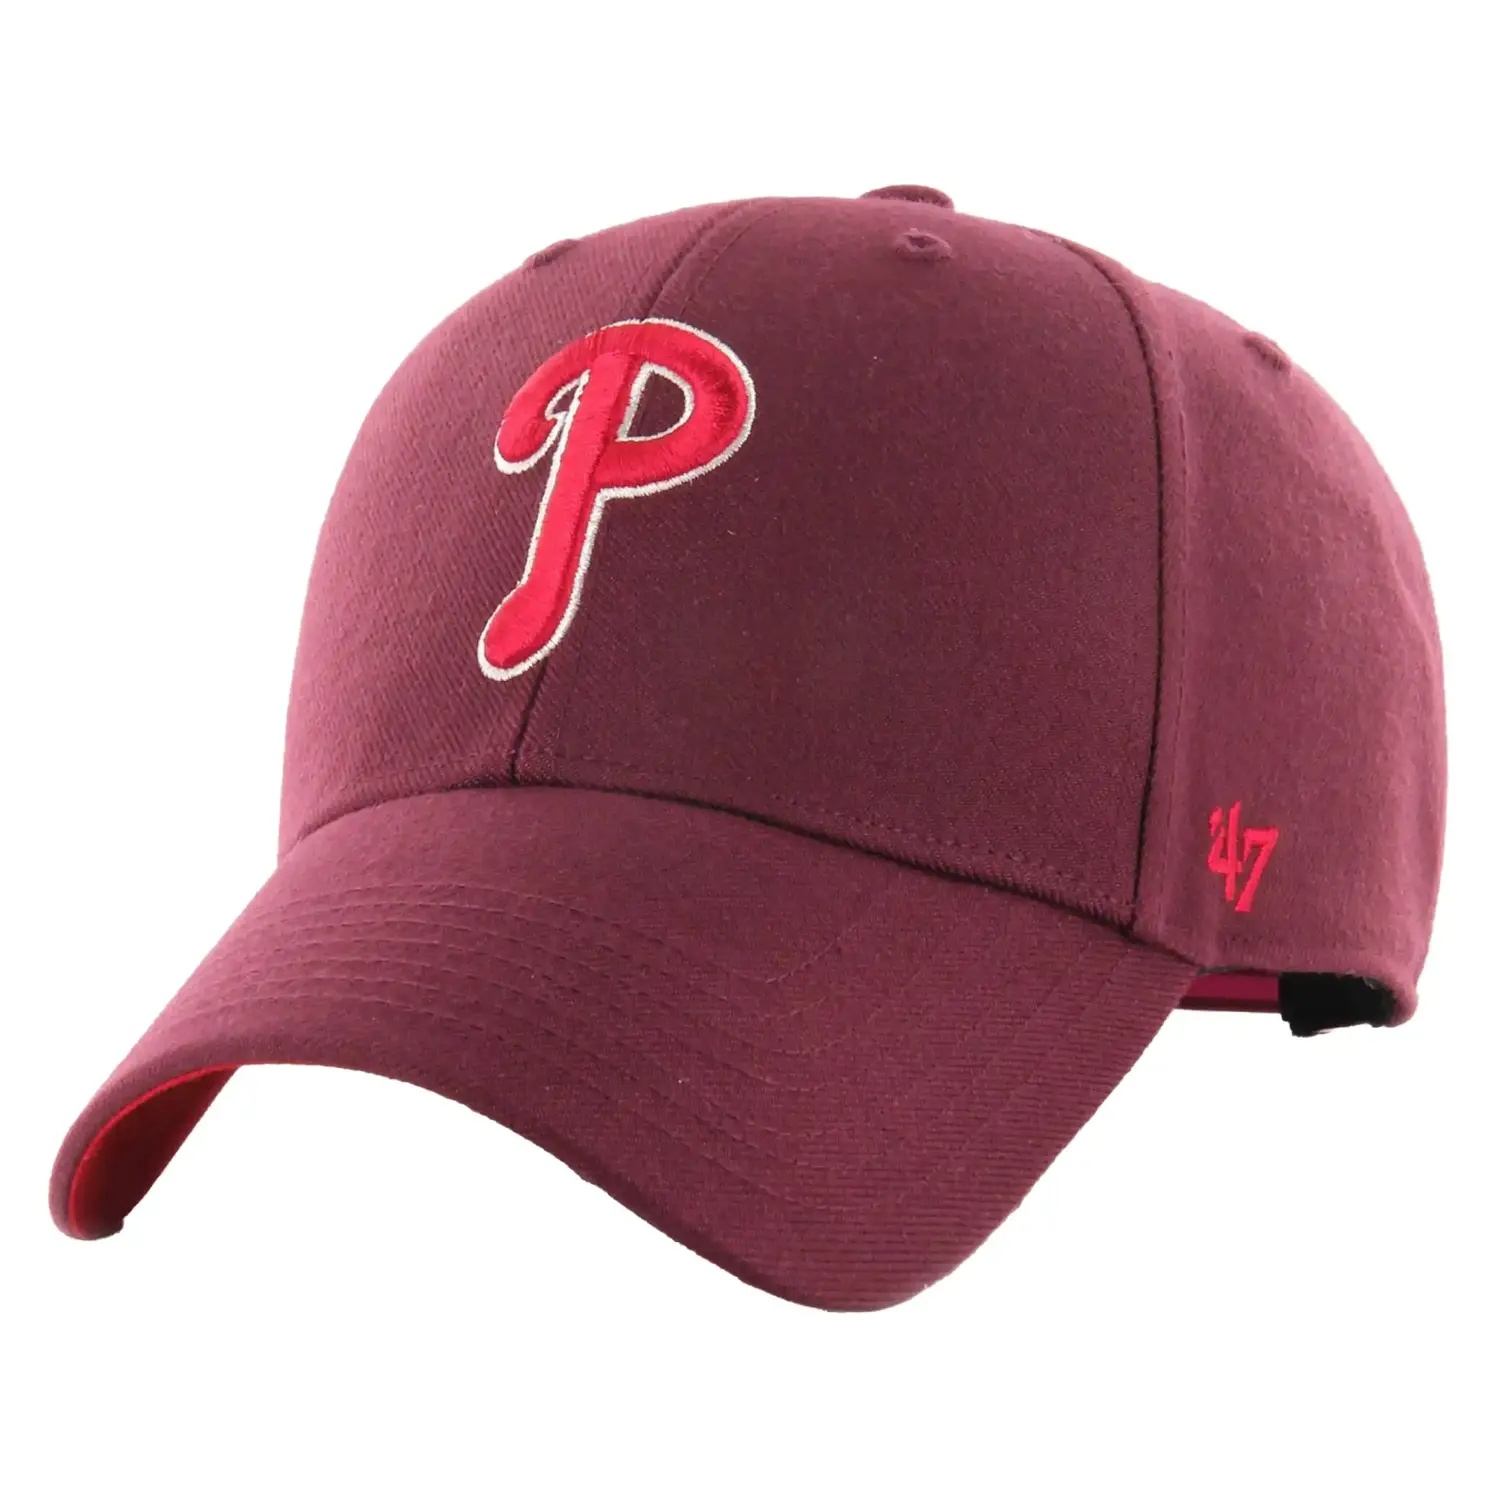 Philadelphia Phillies '47 Team Franchise Fitted Hat - Red